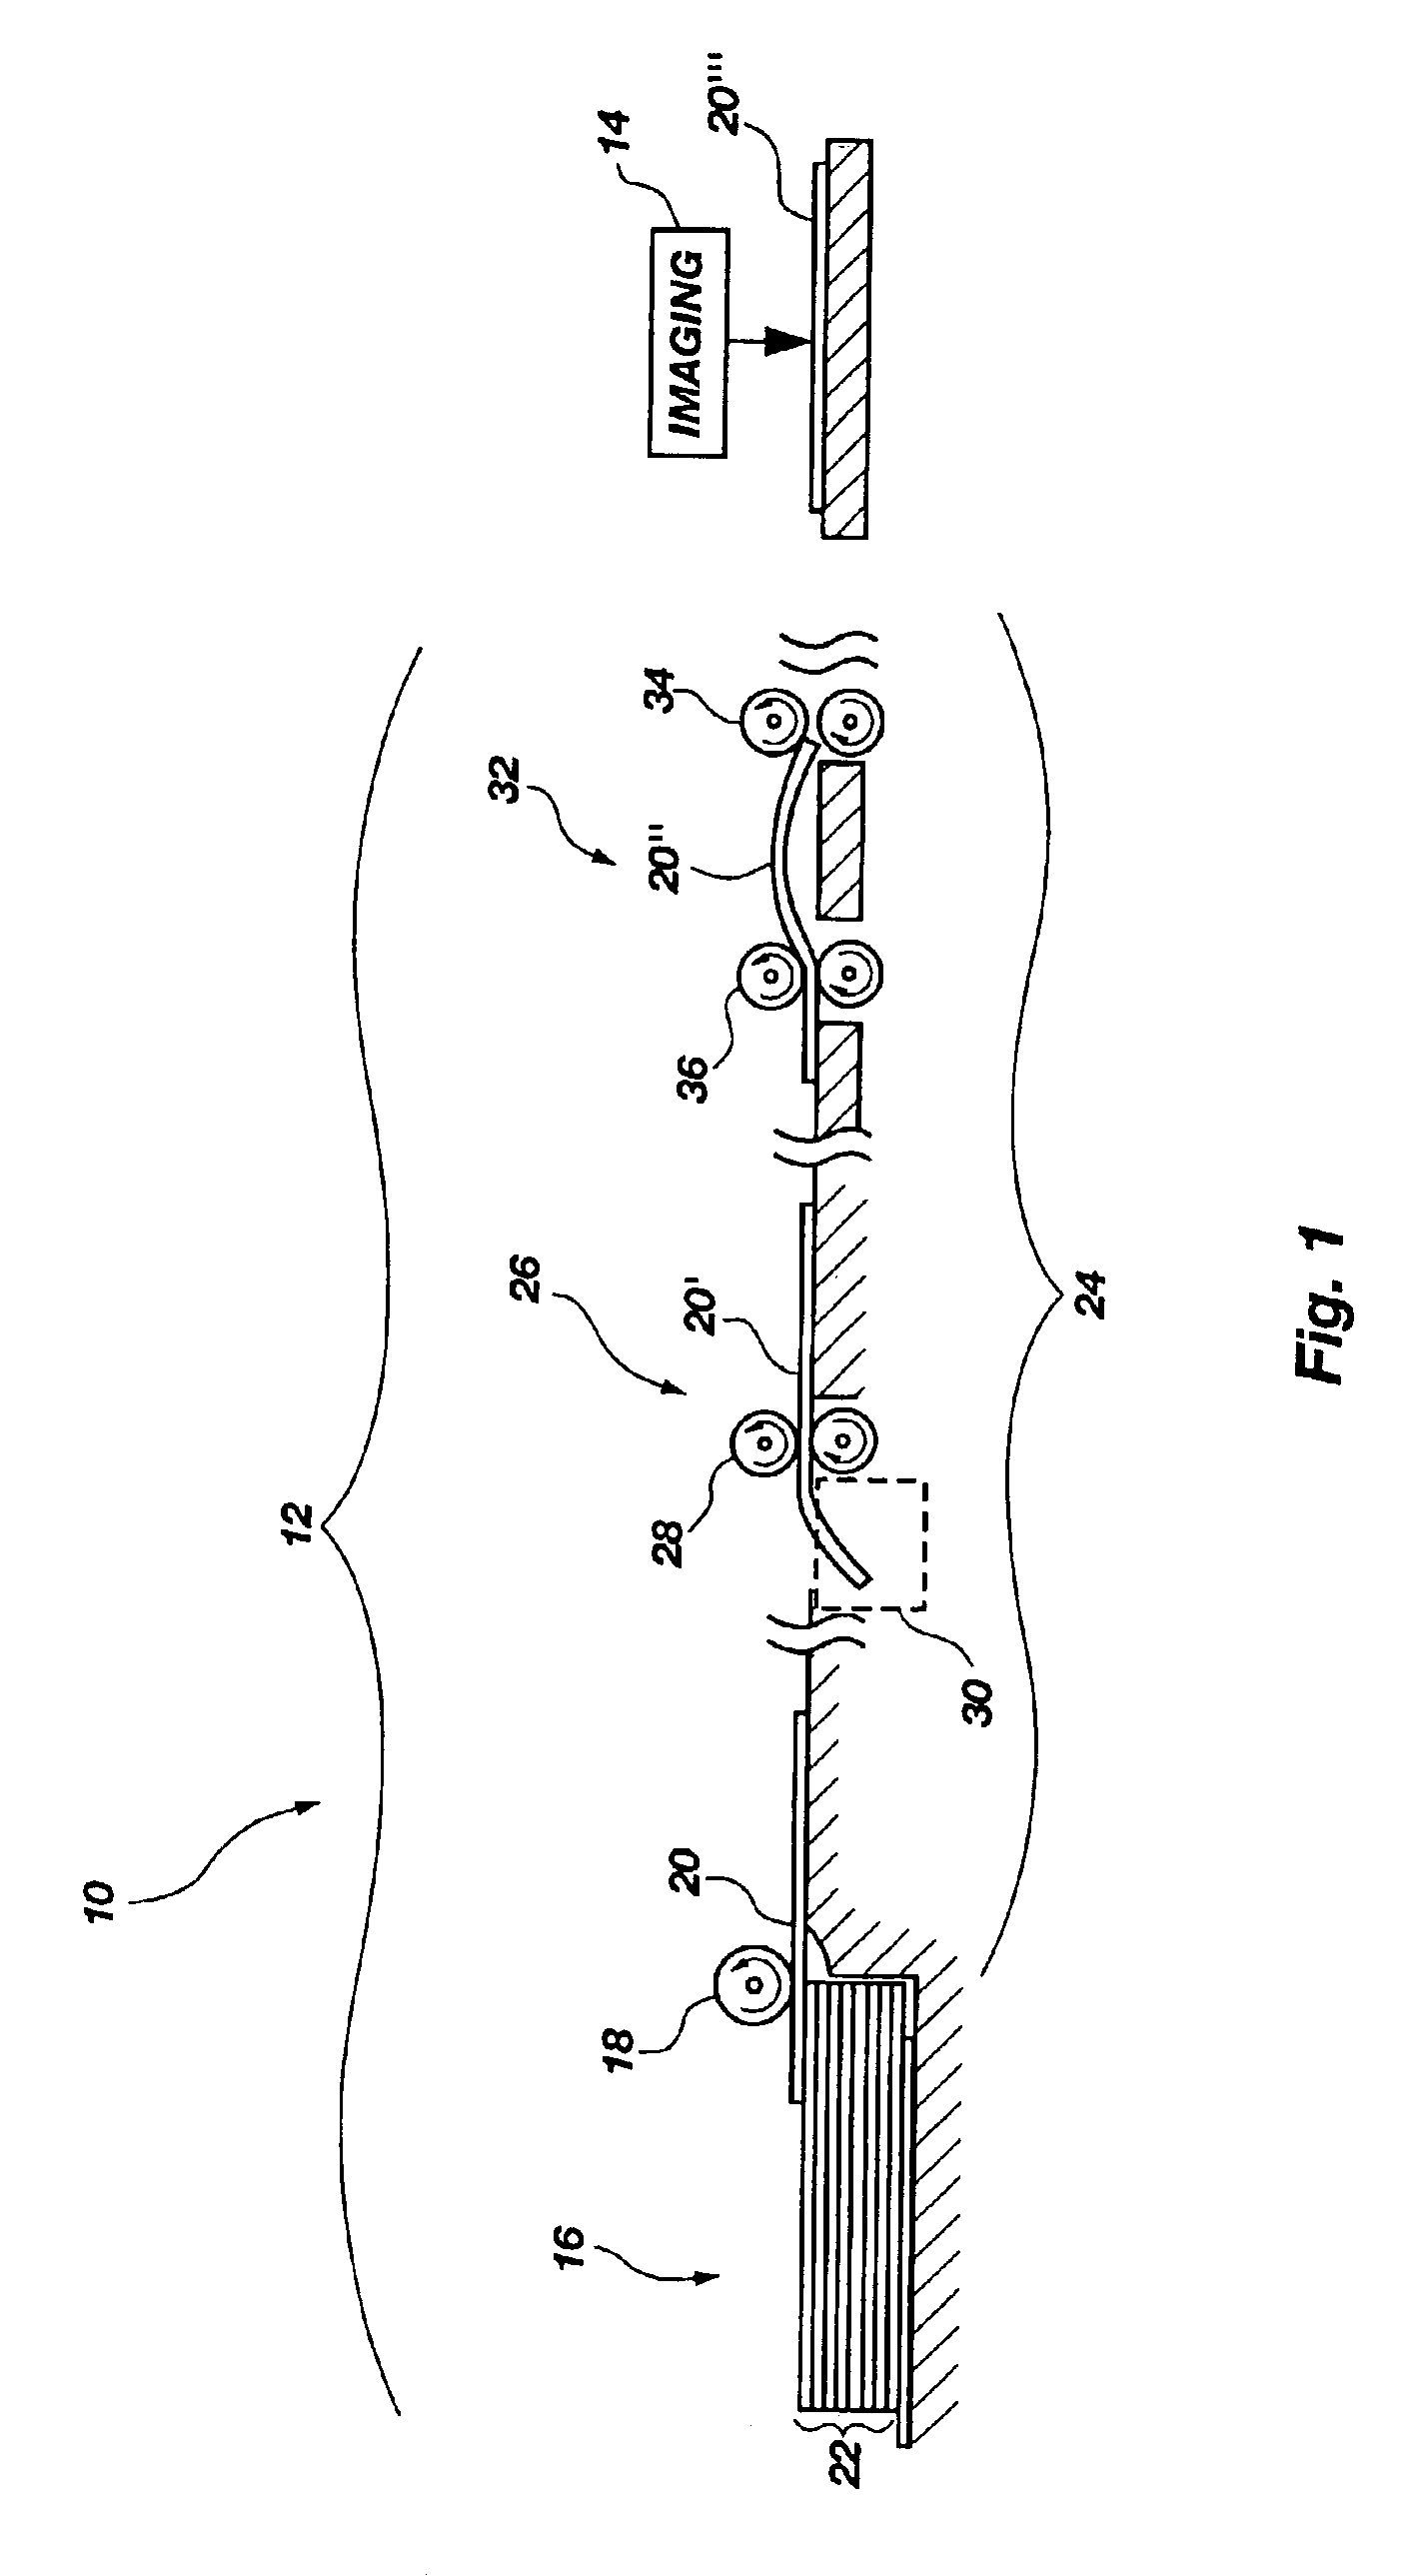 Media stiffness detection device and method therefor